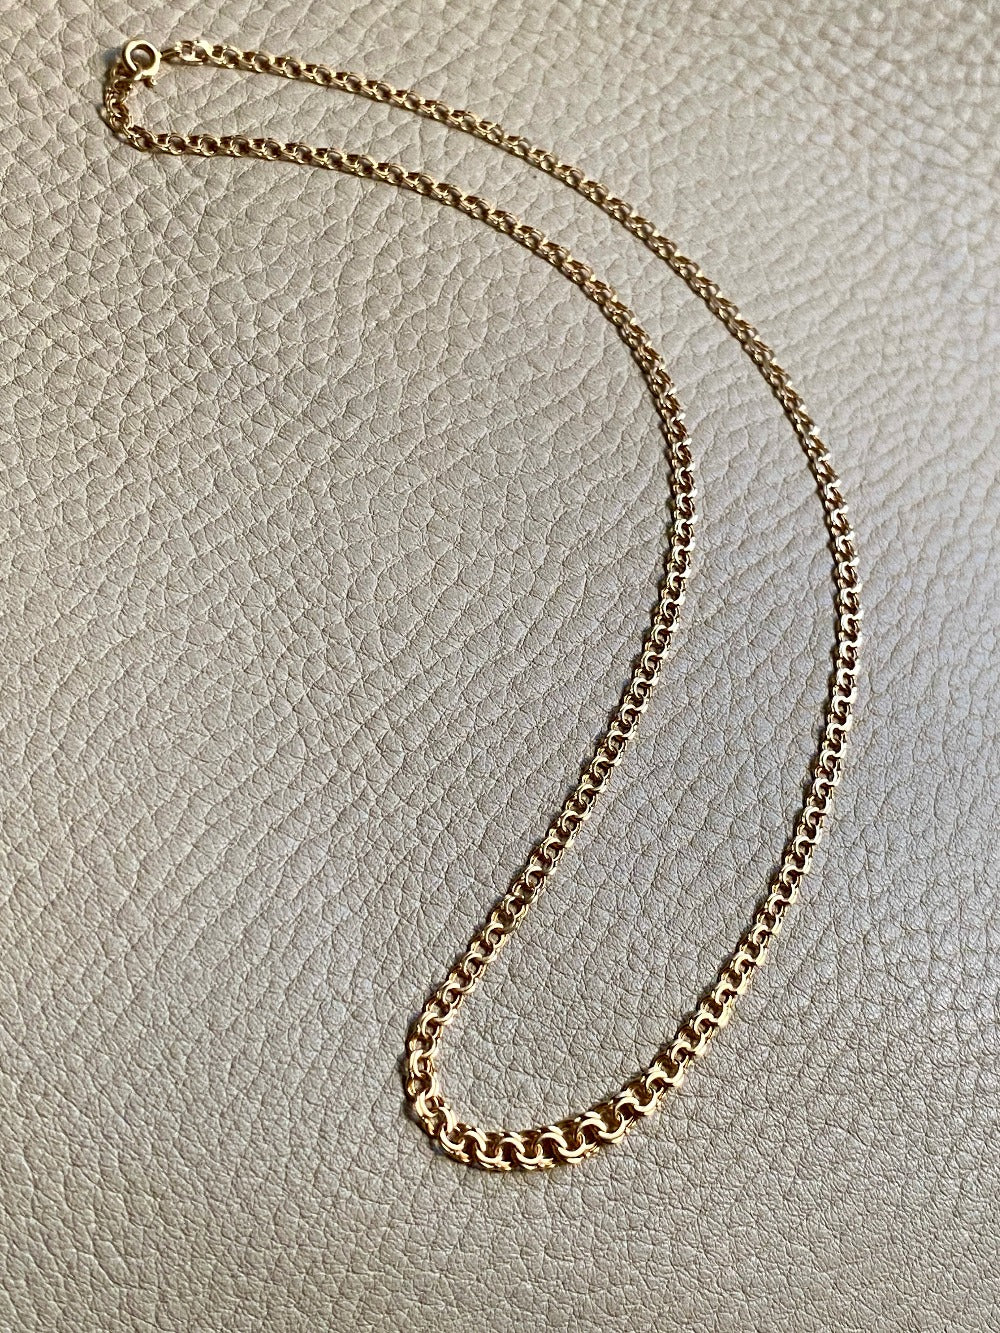 Vintage Graduated double link chain necklace in solid 18k Gold! 16.5 inch length